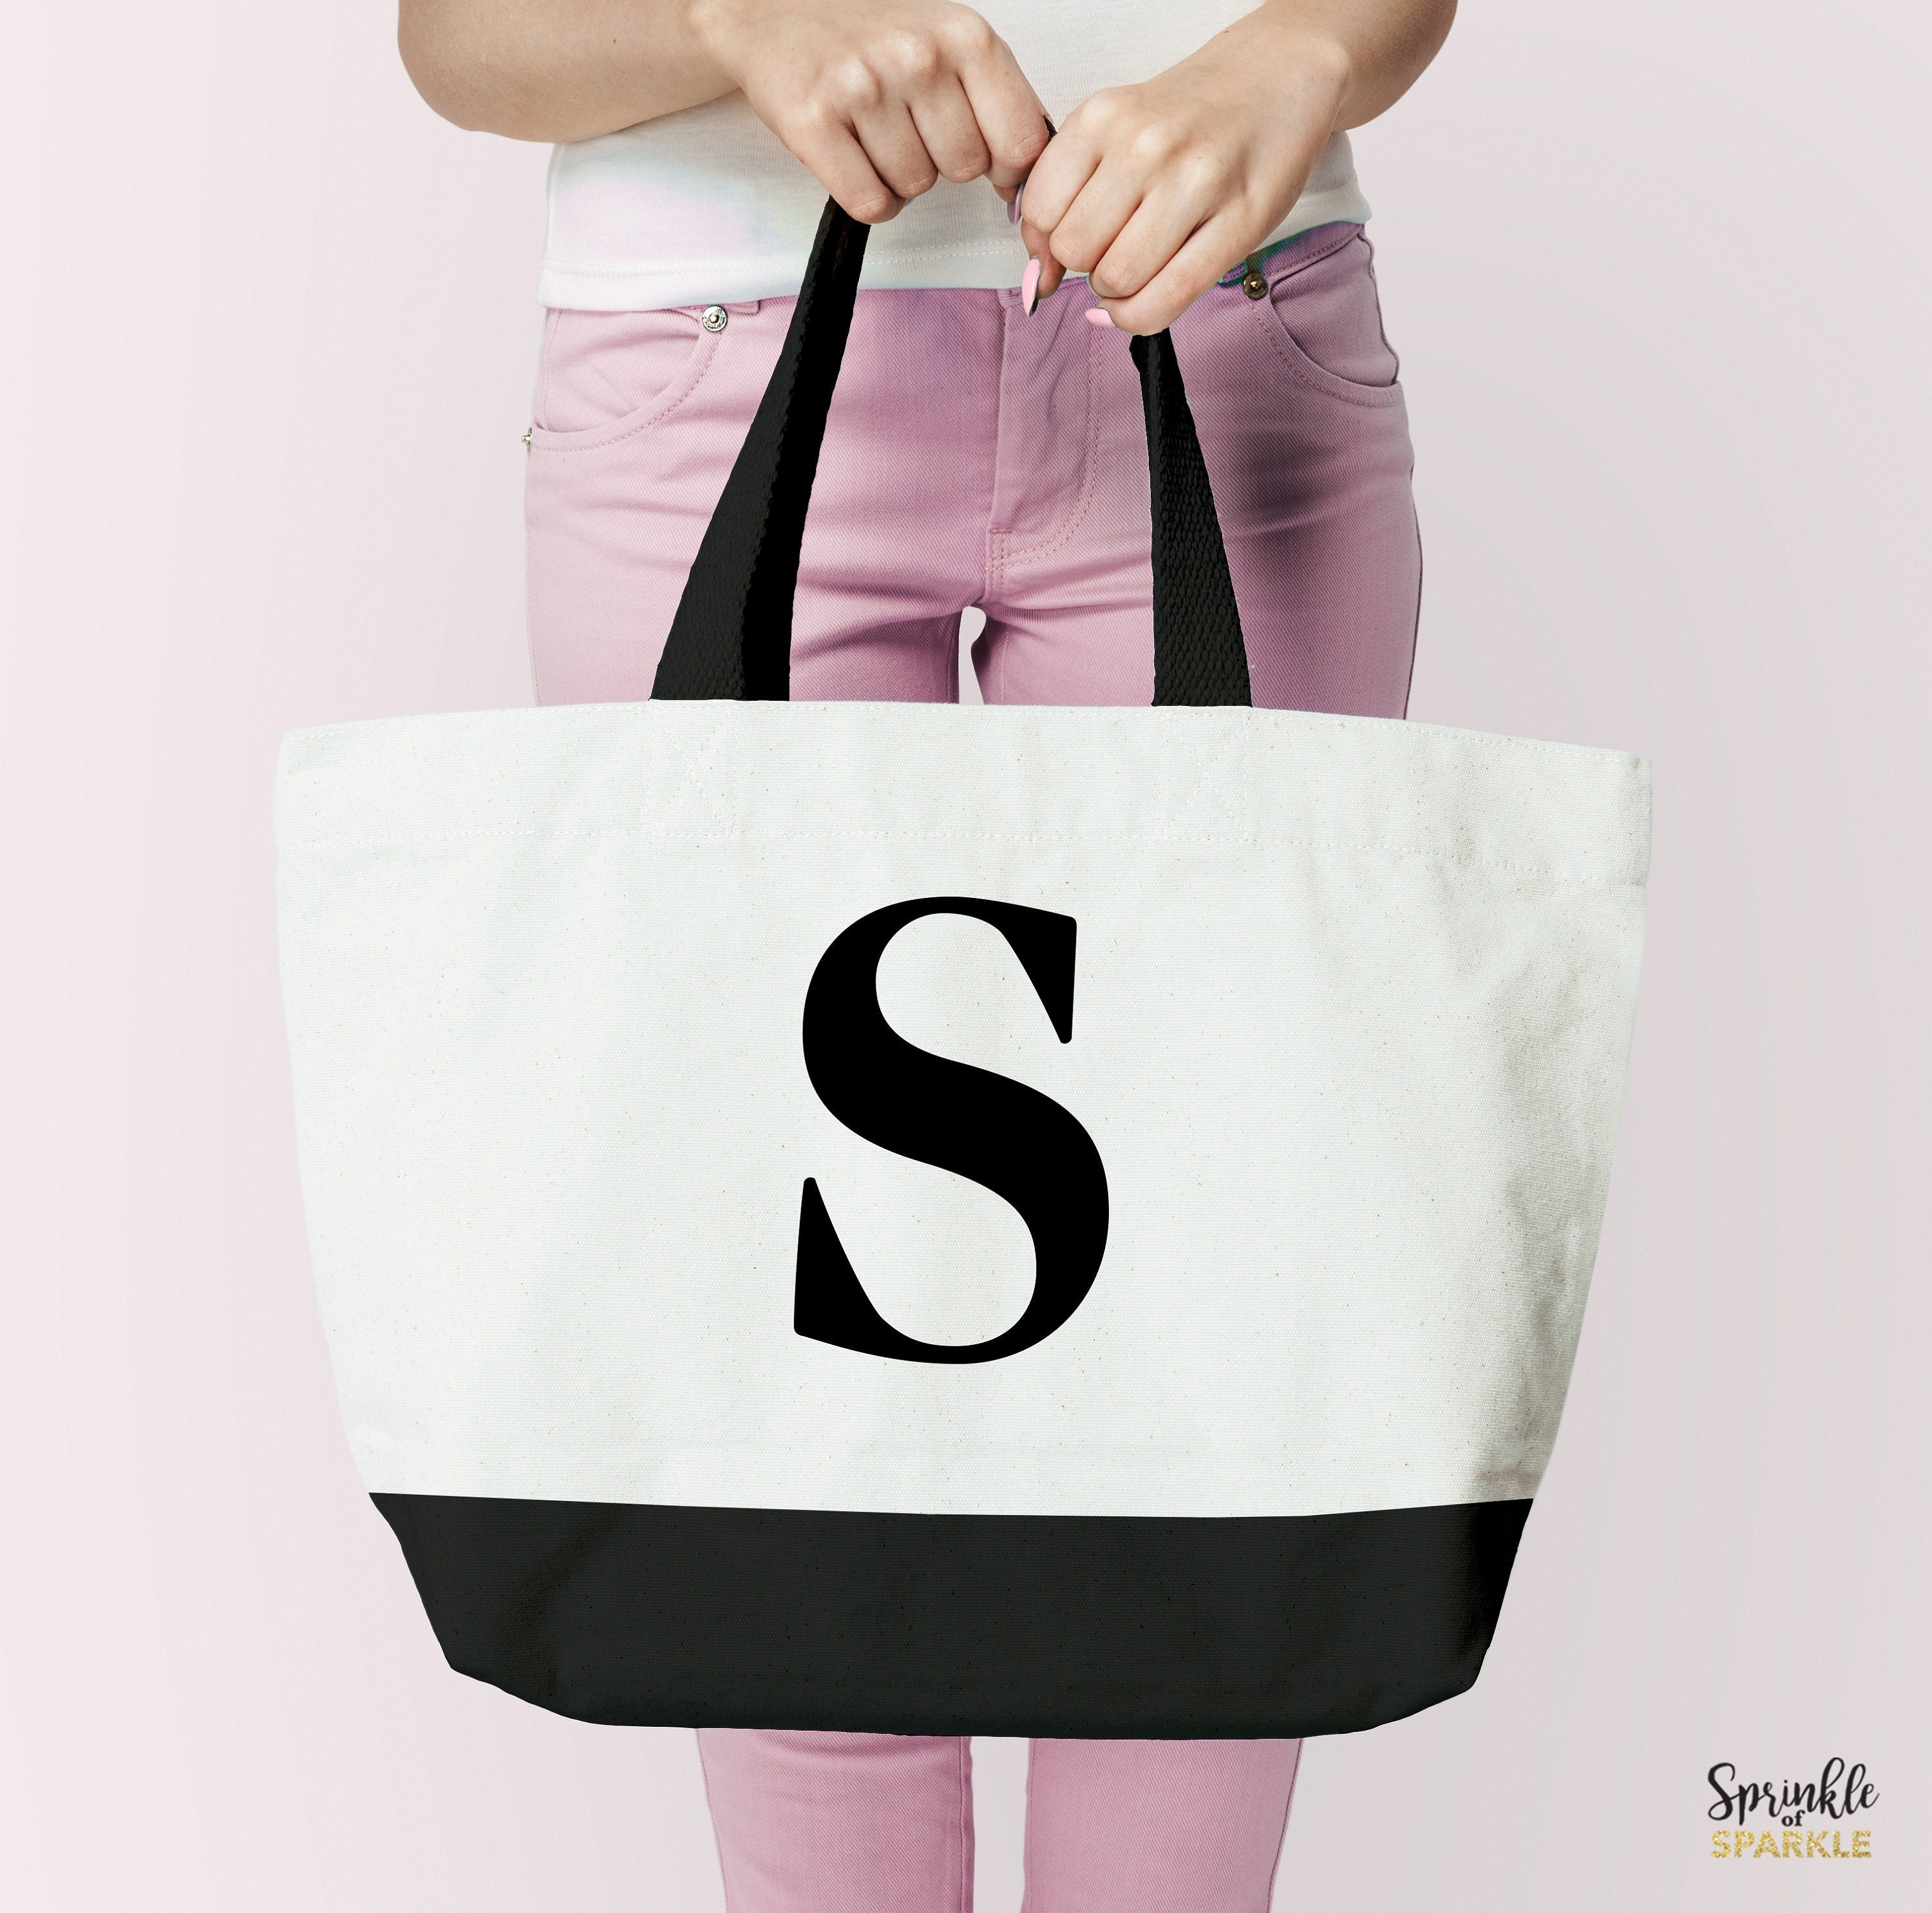 Lamyba Personalized Initial Canvas Beach Bag, Monogrammed Gift Tote Bag for Women with Makeup Bag and Top Zipper, Letter B